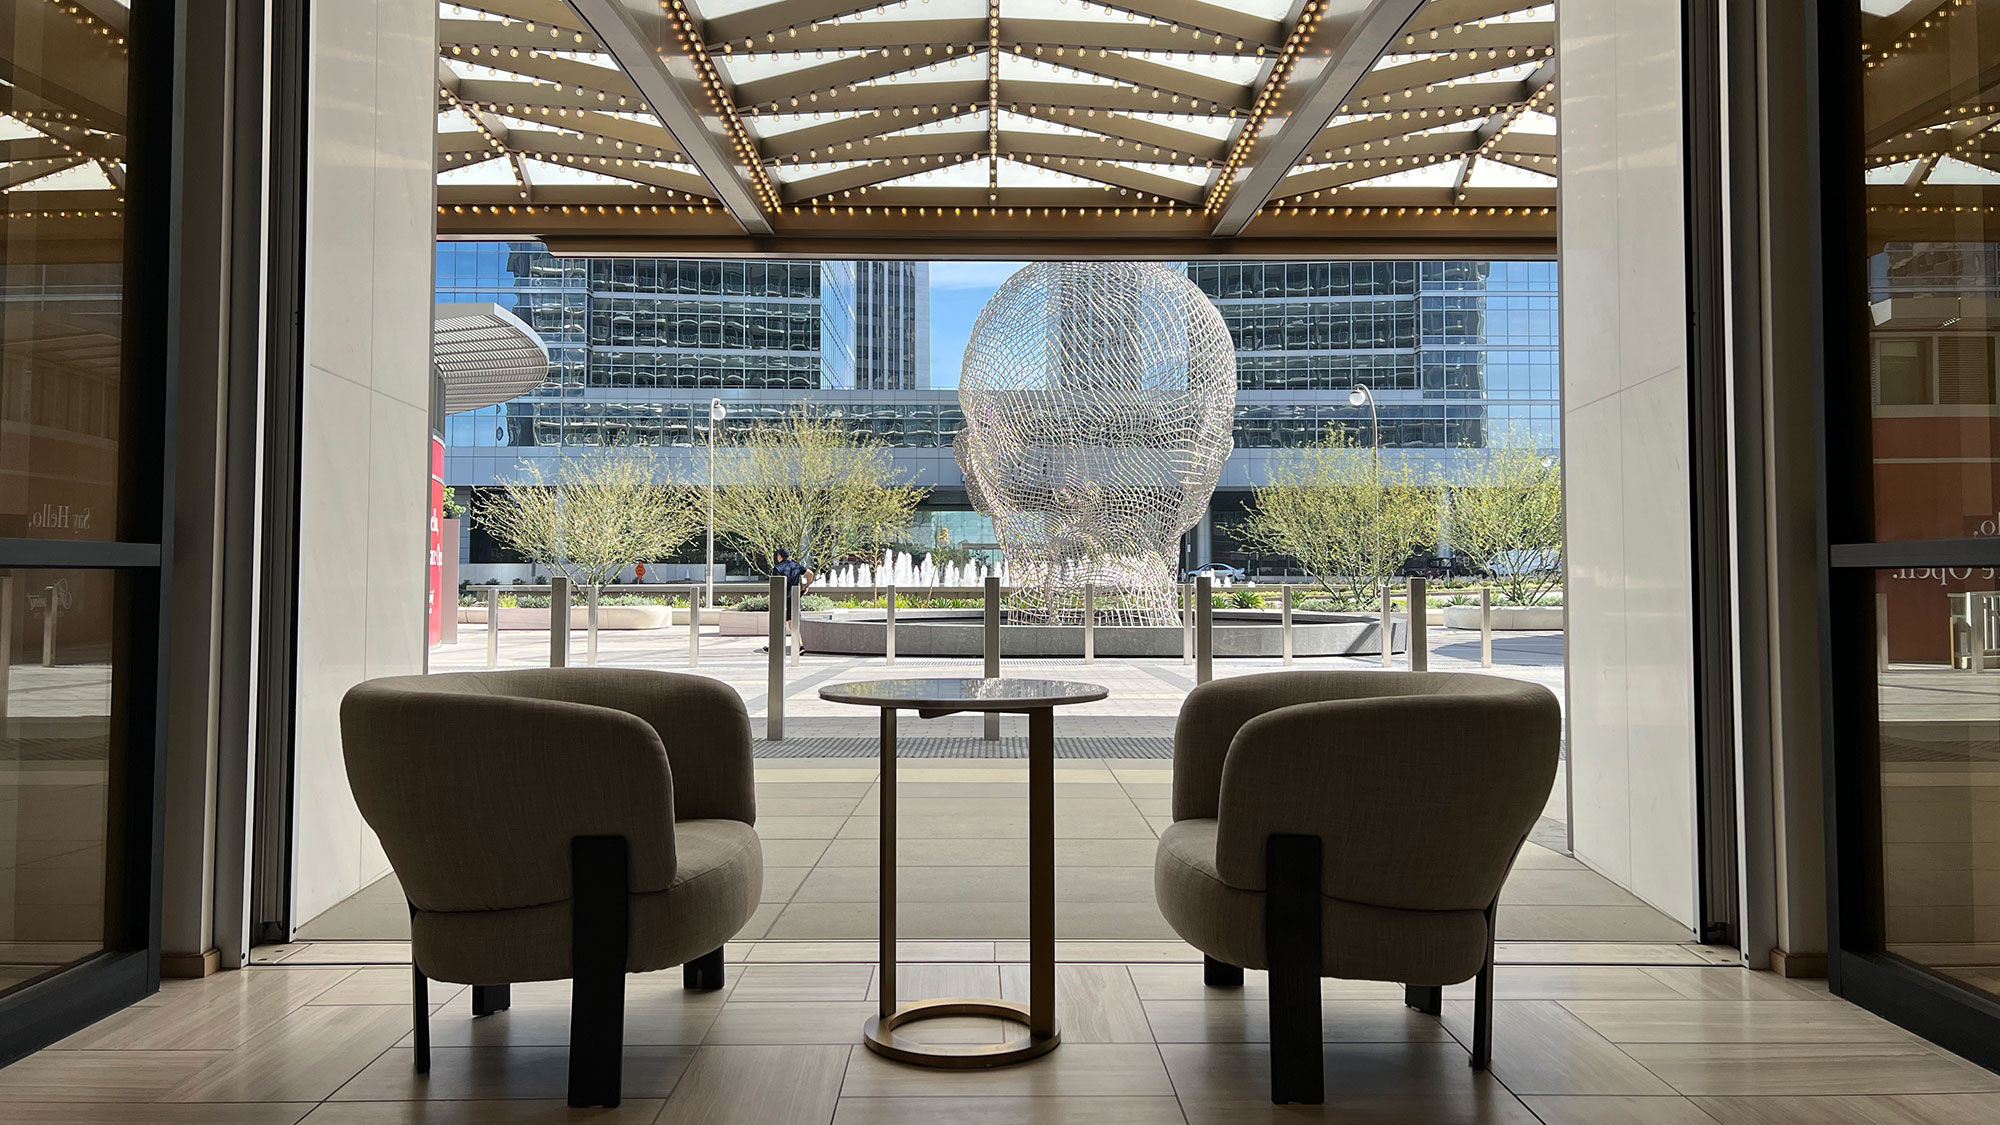 The lobby of the Fairmont Century Plaza features giant open doorways, thanks to floor-to-ceiling windows that sink into the floor at the touch of a button.